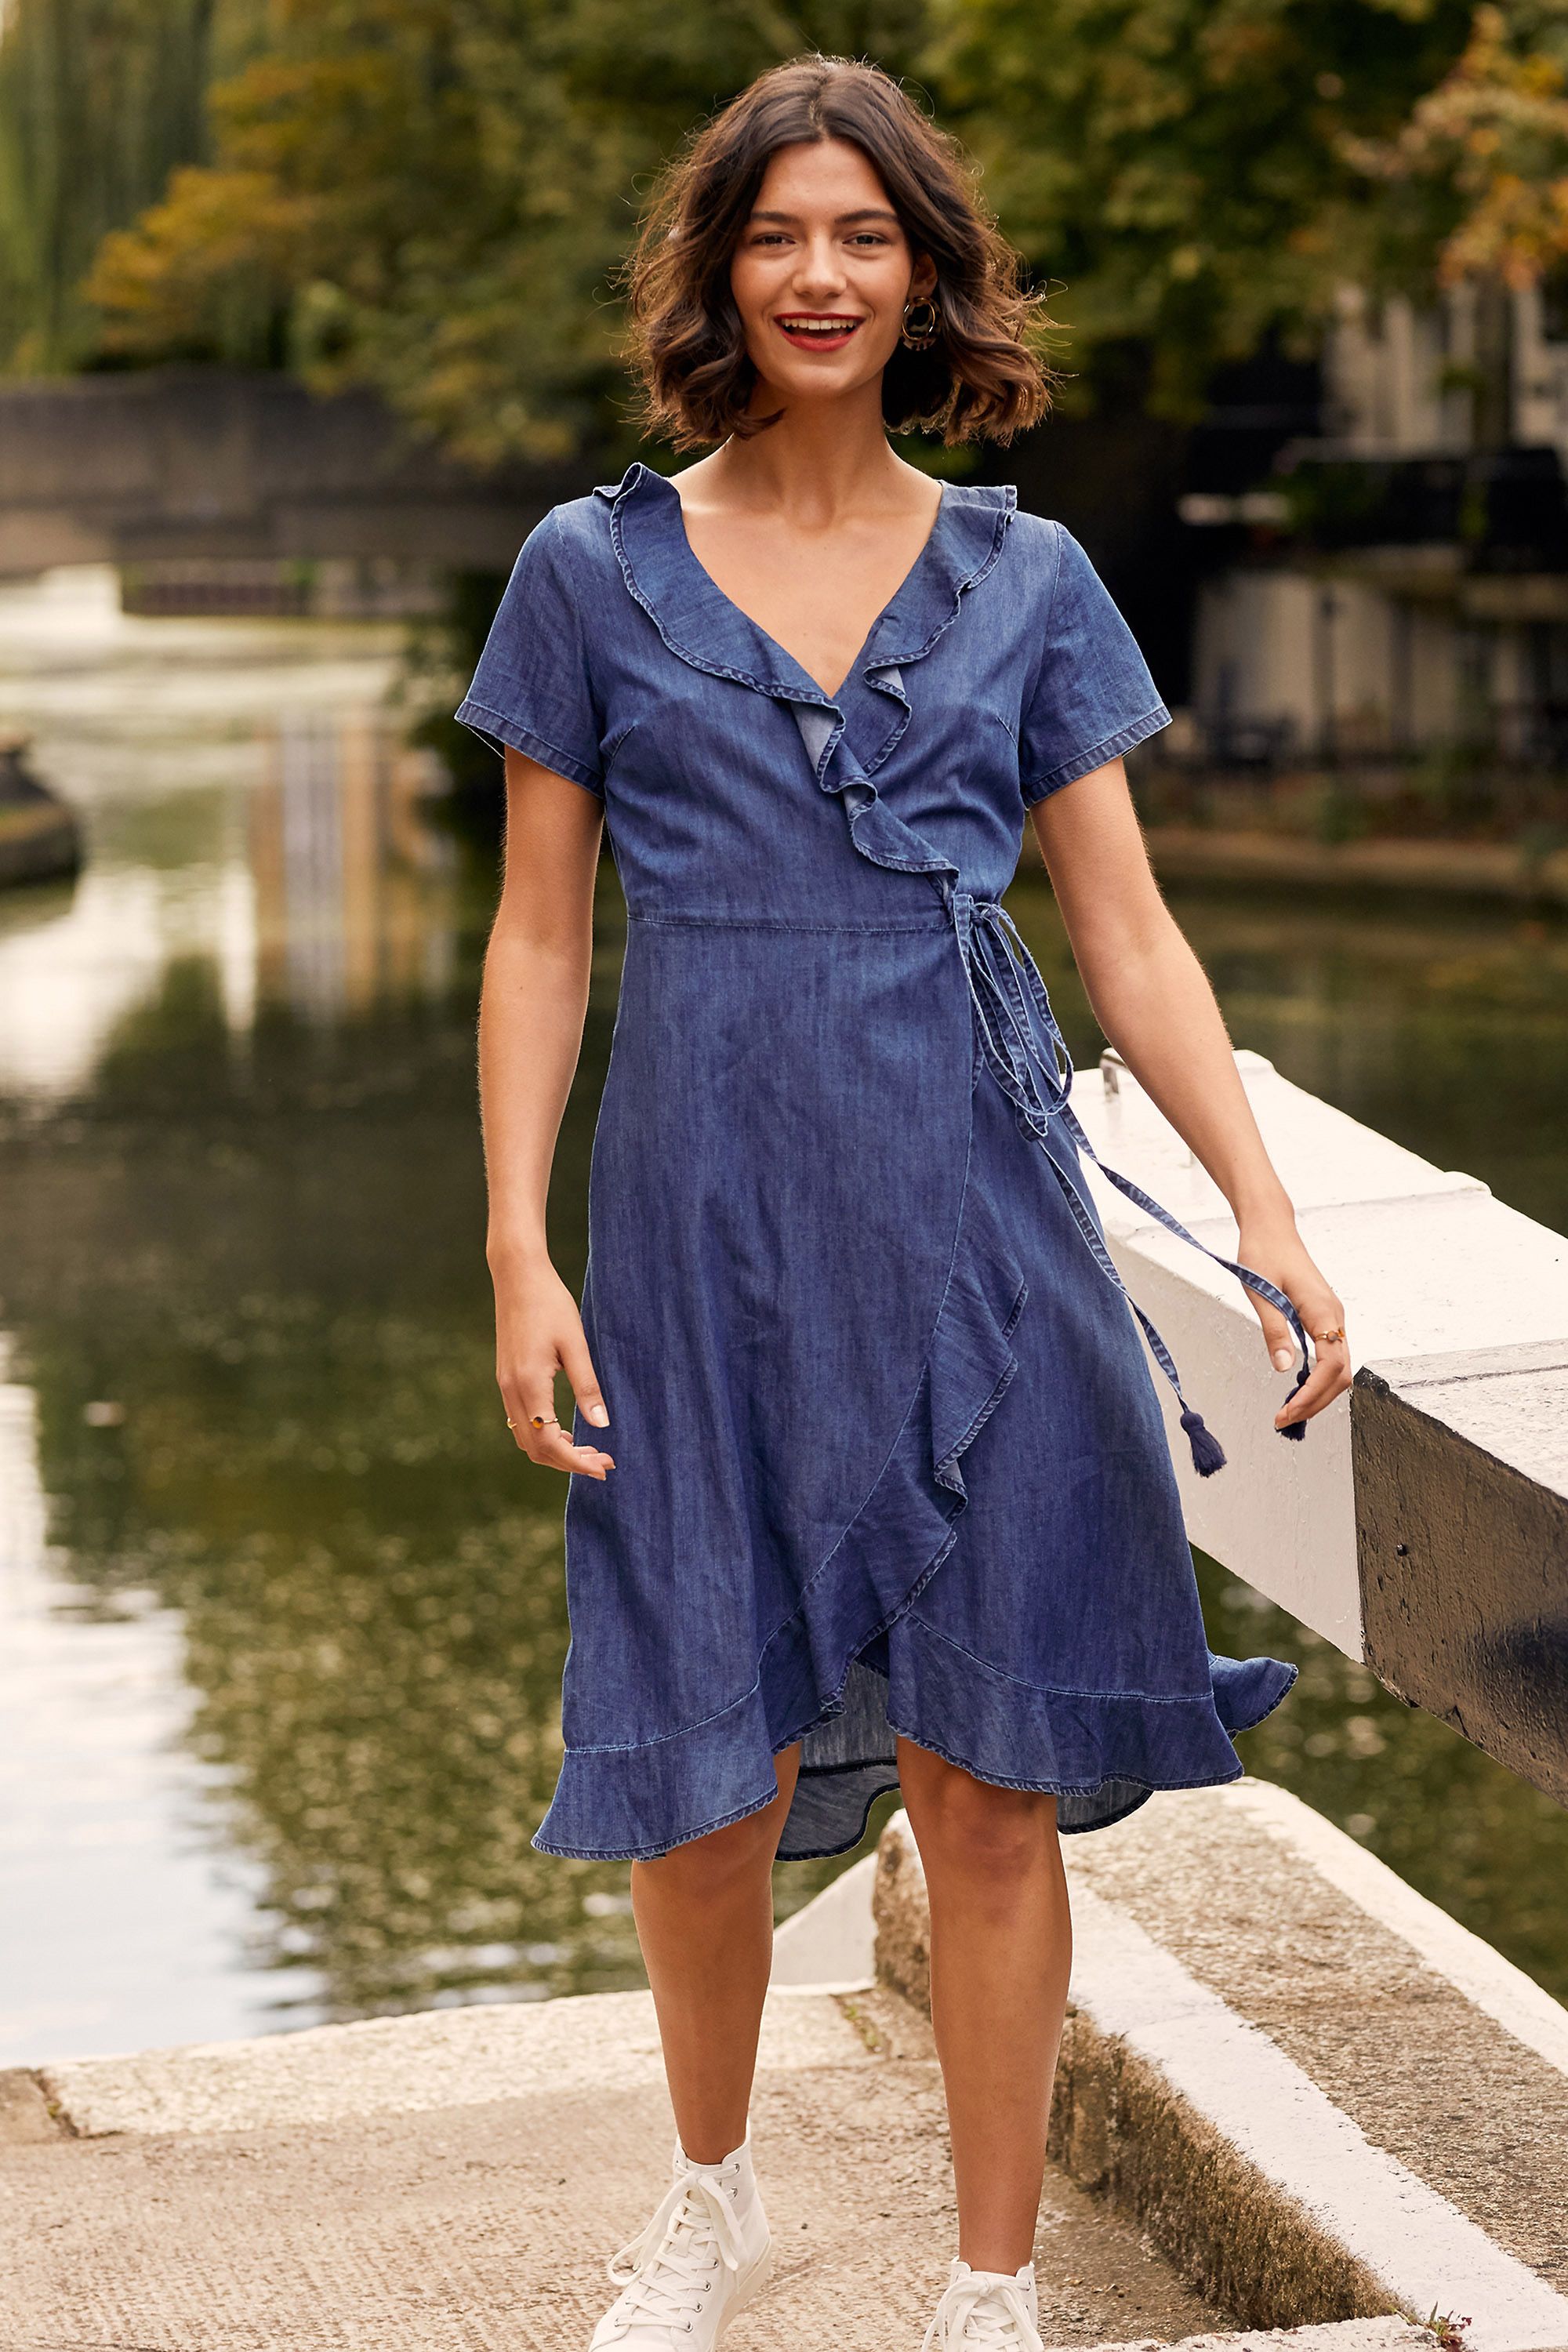 A staple of every wardrobe, this Denim Wrap Dress gives you an effortless choice between smart and casual. Cut in an elegant wrap shape that's super stylish, it's been enhanced with dainty ruffles and a self-tie waist. The cotton chambray gives it a lightweight feel, with a little stretch woven into the fabric for extra movement. Consider trainers and a rucksack for weekend adventures.100% Cotton. Machine Wash At 30. Length is 112cm/40inches